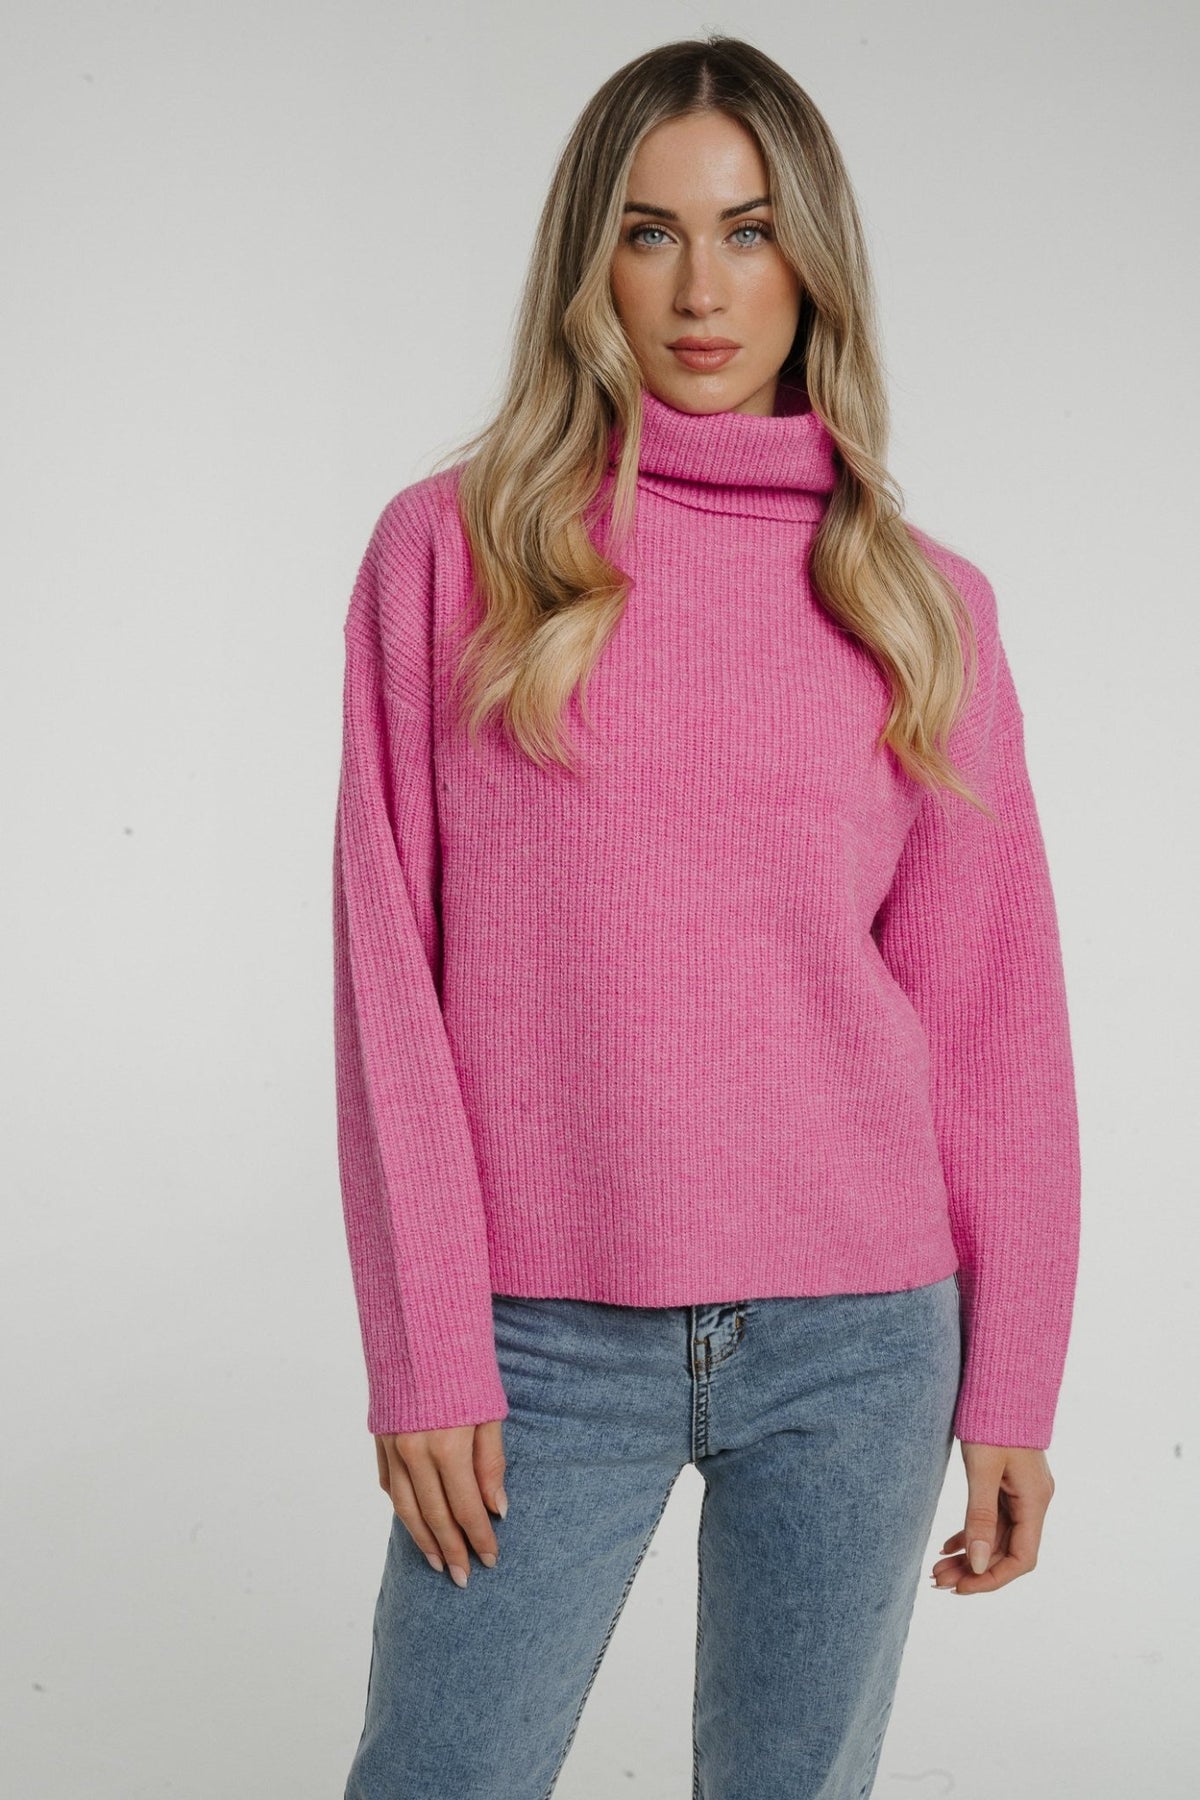 Ally Polo Neck Jumper In Pink - The Walk in Wardrobe